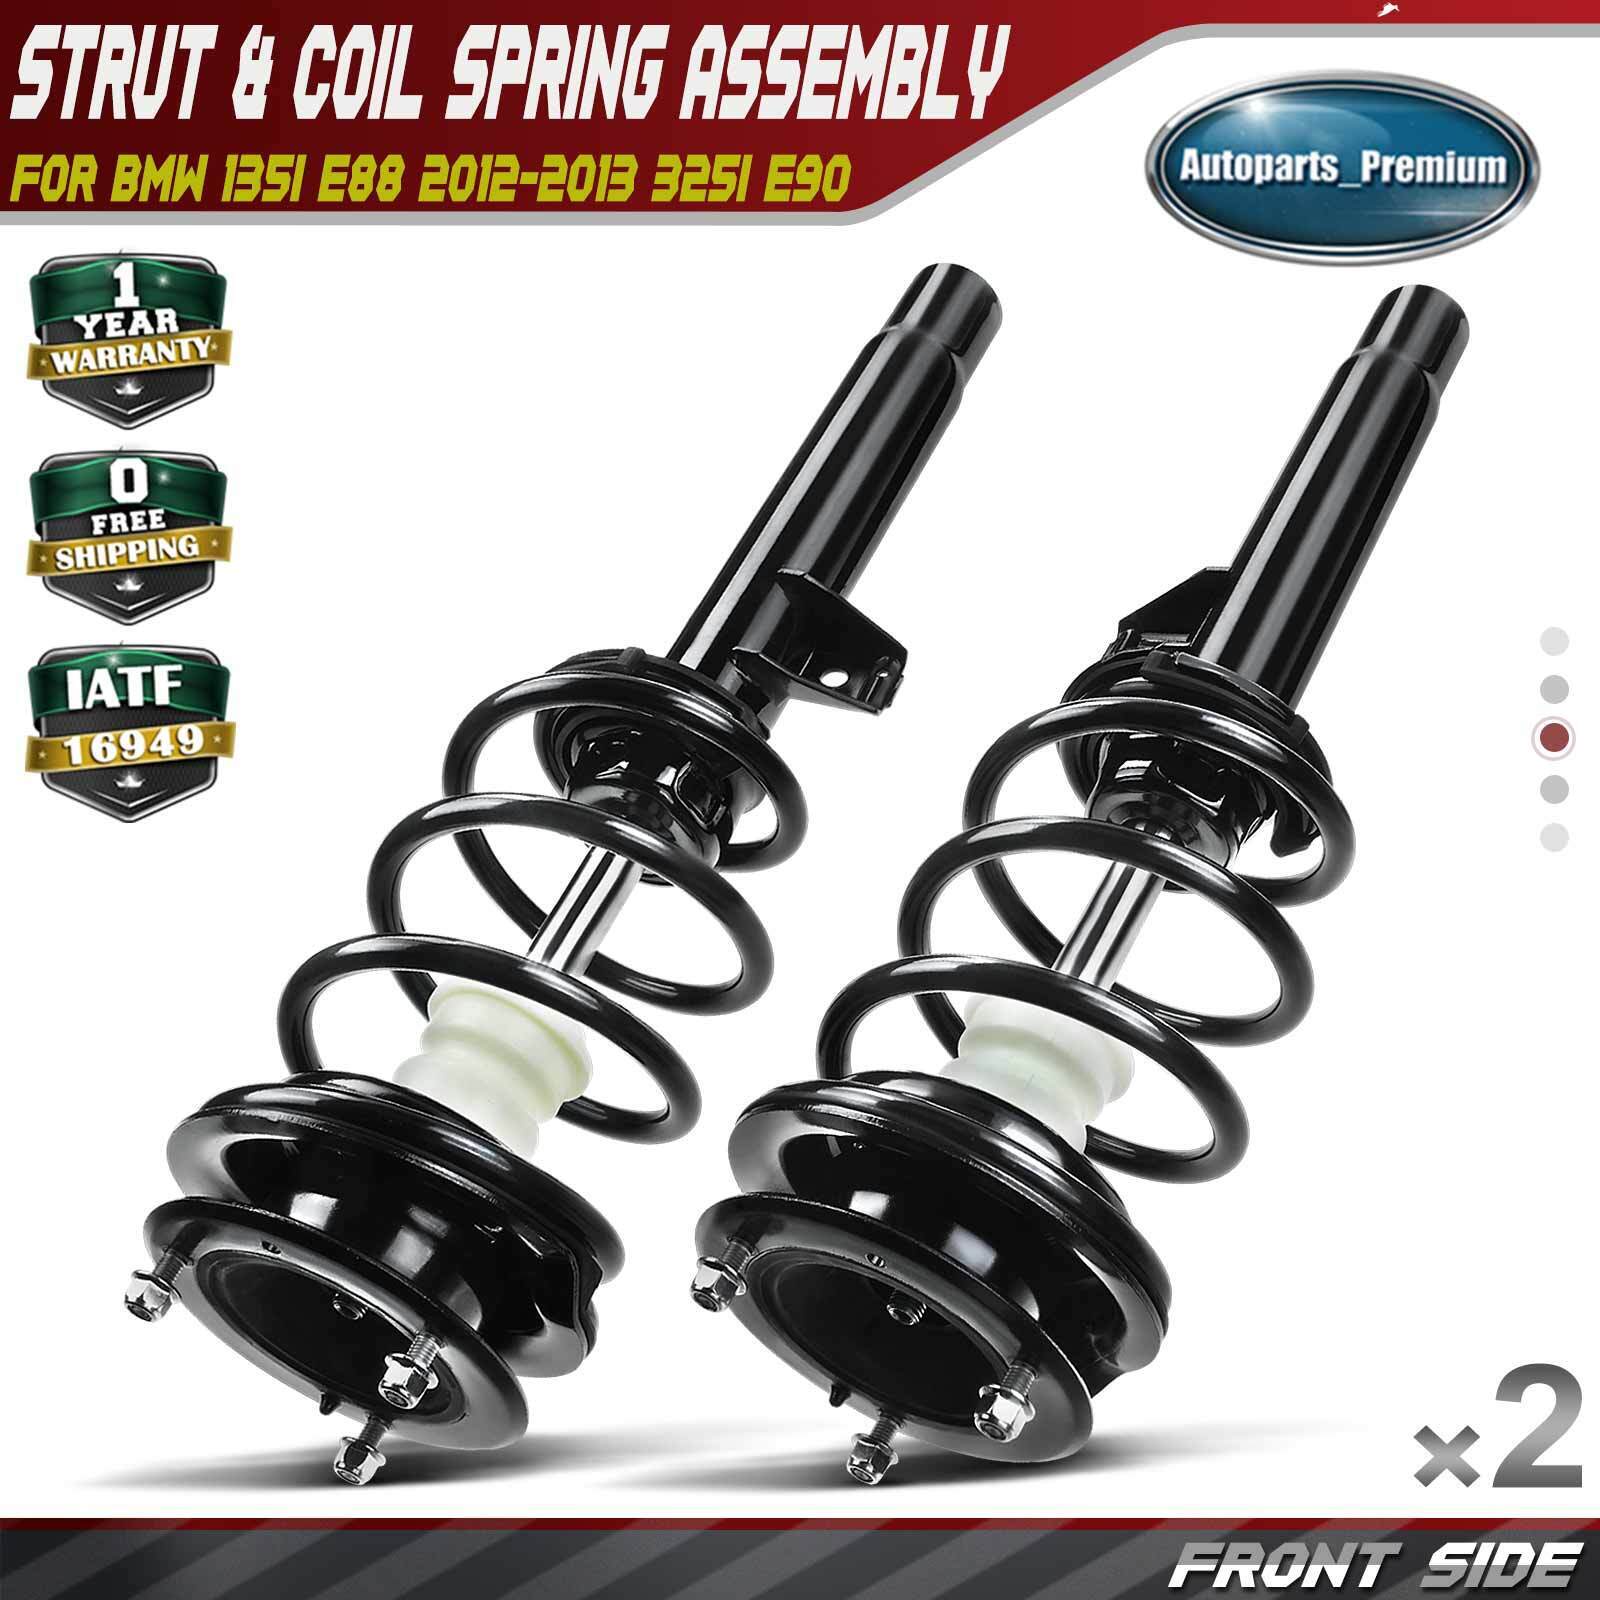 2x Complete Strut & Coil Spring Assembly for BMW 135i E88 12-13 325i E90 Front